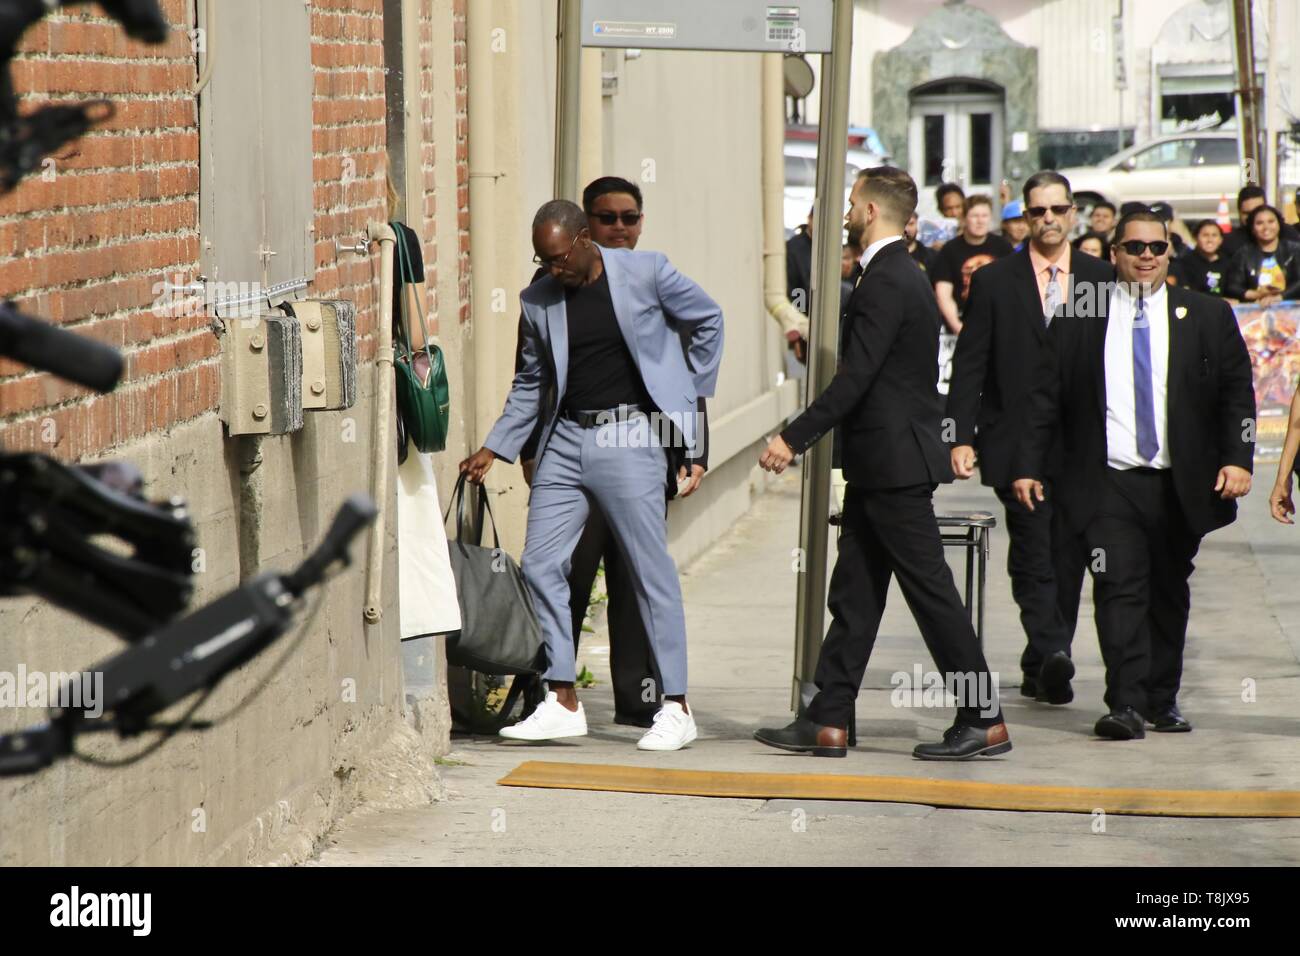 Don Cheadle arrives at ABC Studios for an appearance on 'Jimmy Kimmel Live!'  Featuring: Don Cheadle Where: Hollywood, California, United States When: 12 Apr 2019 Credit: WENN.com Stock Photo